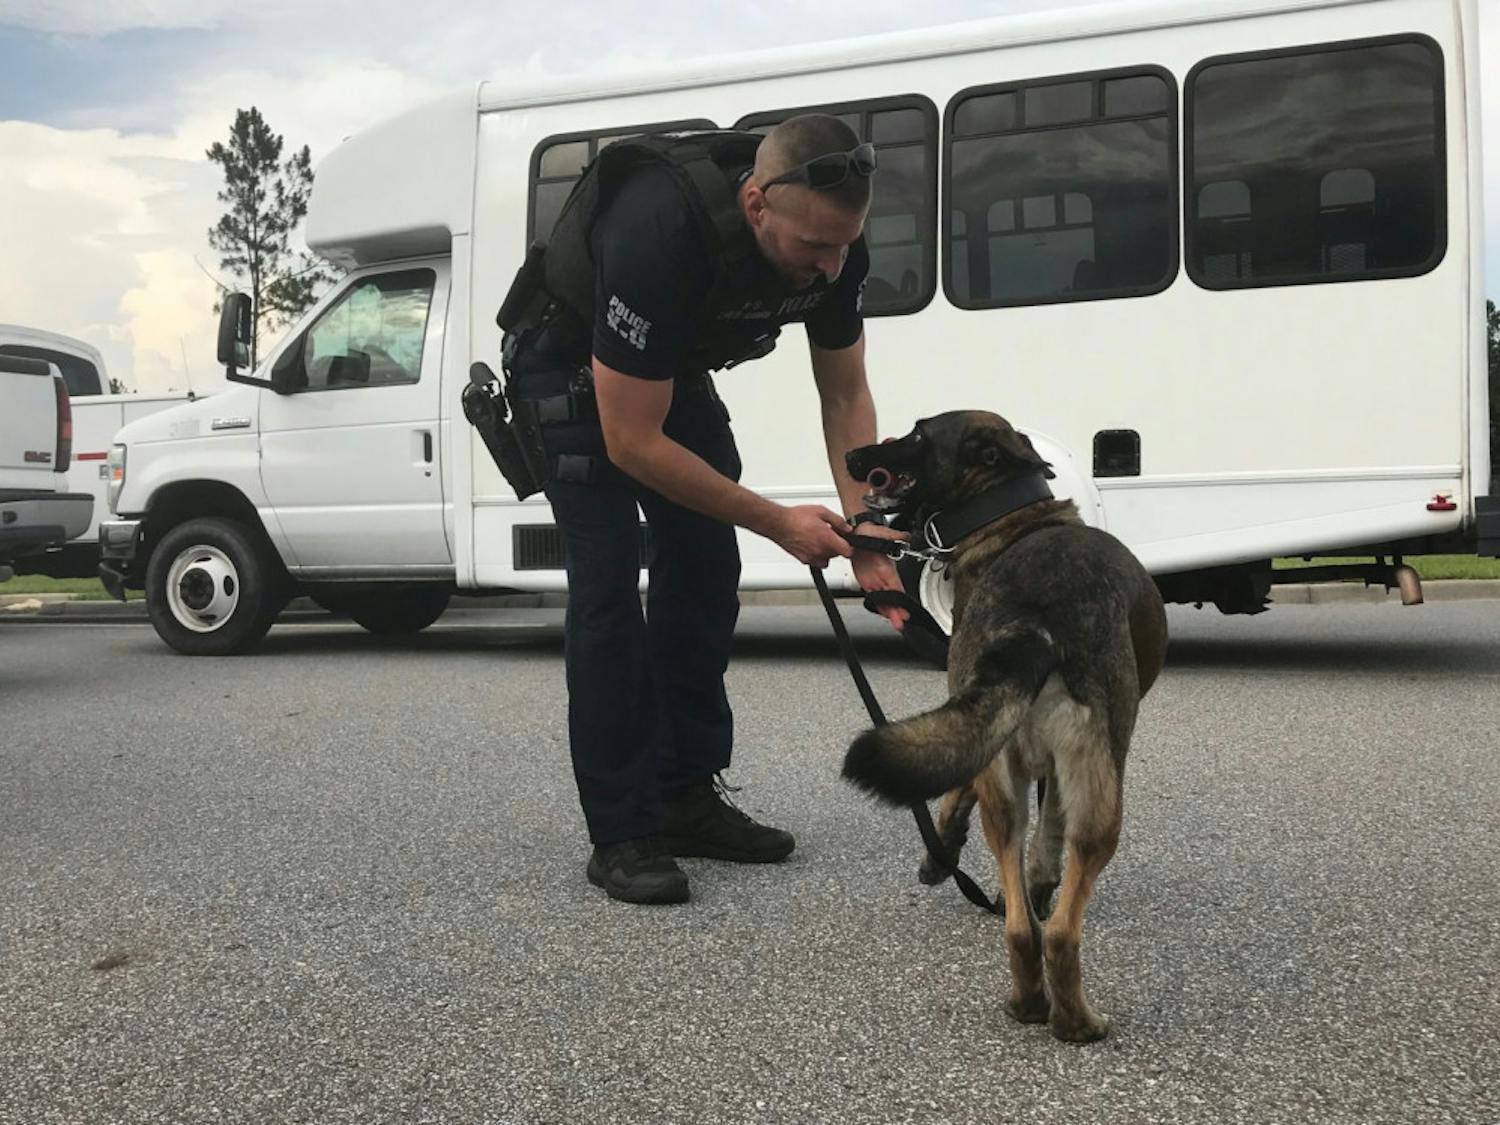 Ares gets to play with his reward toy, a red rubber pipe, after finding the scent. K-9 dogs are trained with reward toys to encourage certain behavior.